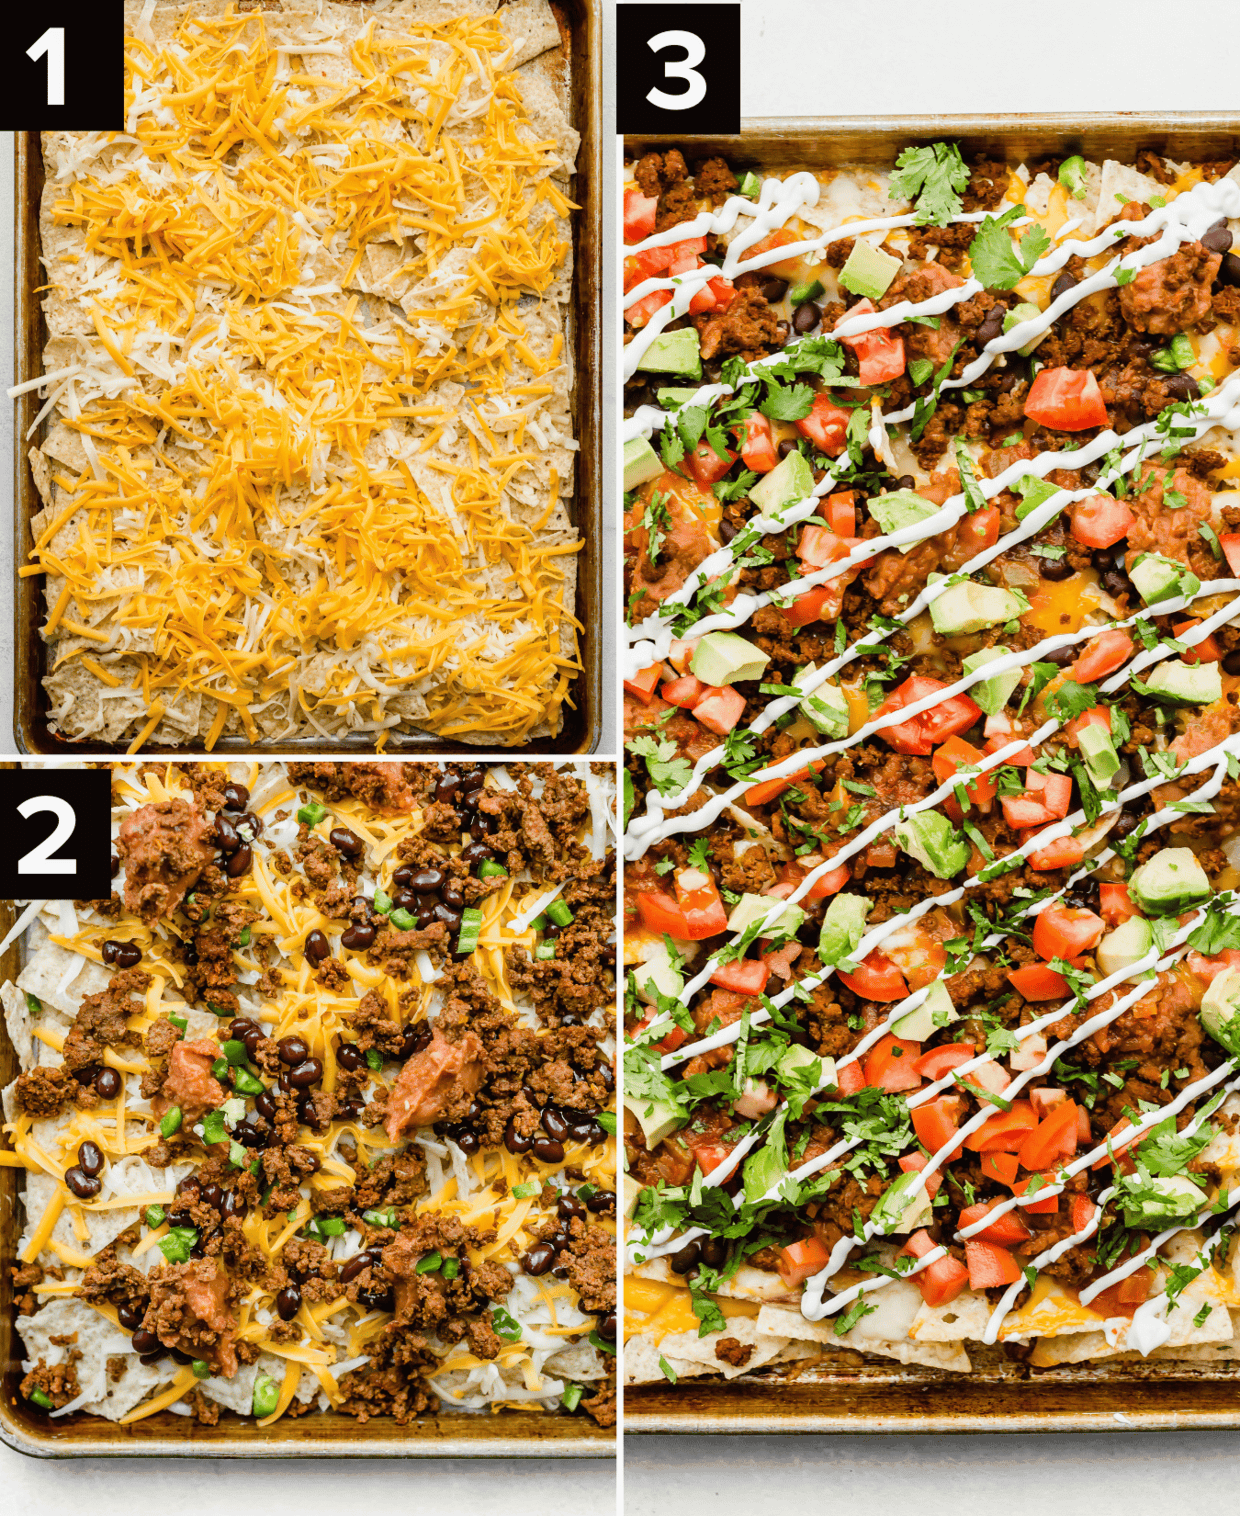 Three images showing how to make baked nachos with beef and lots of cheese, top left image is cheese over chips, bottom left is ground beef covered nachos, and right image is baked sheet pan nachos with toppings.